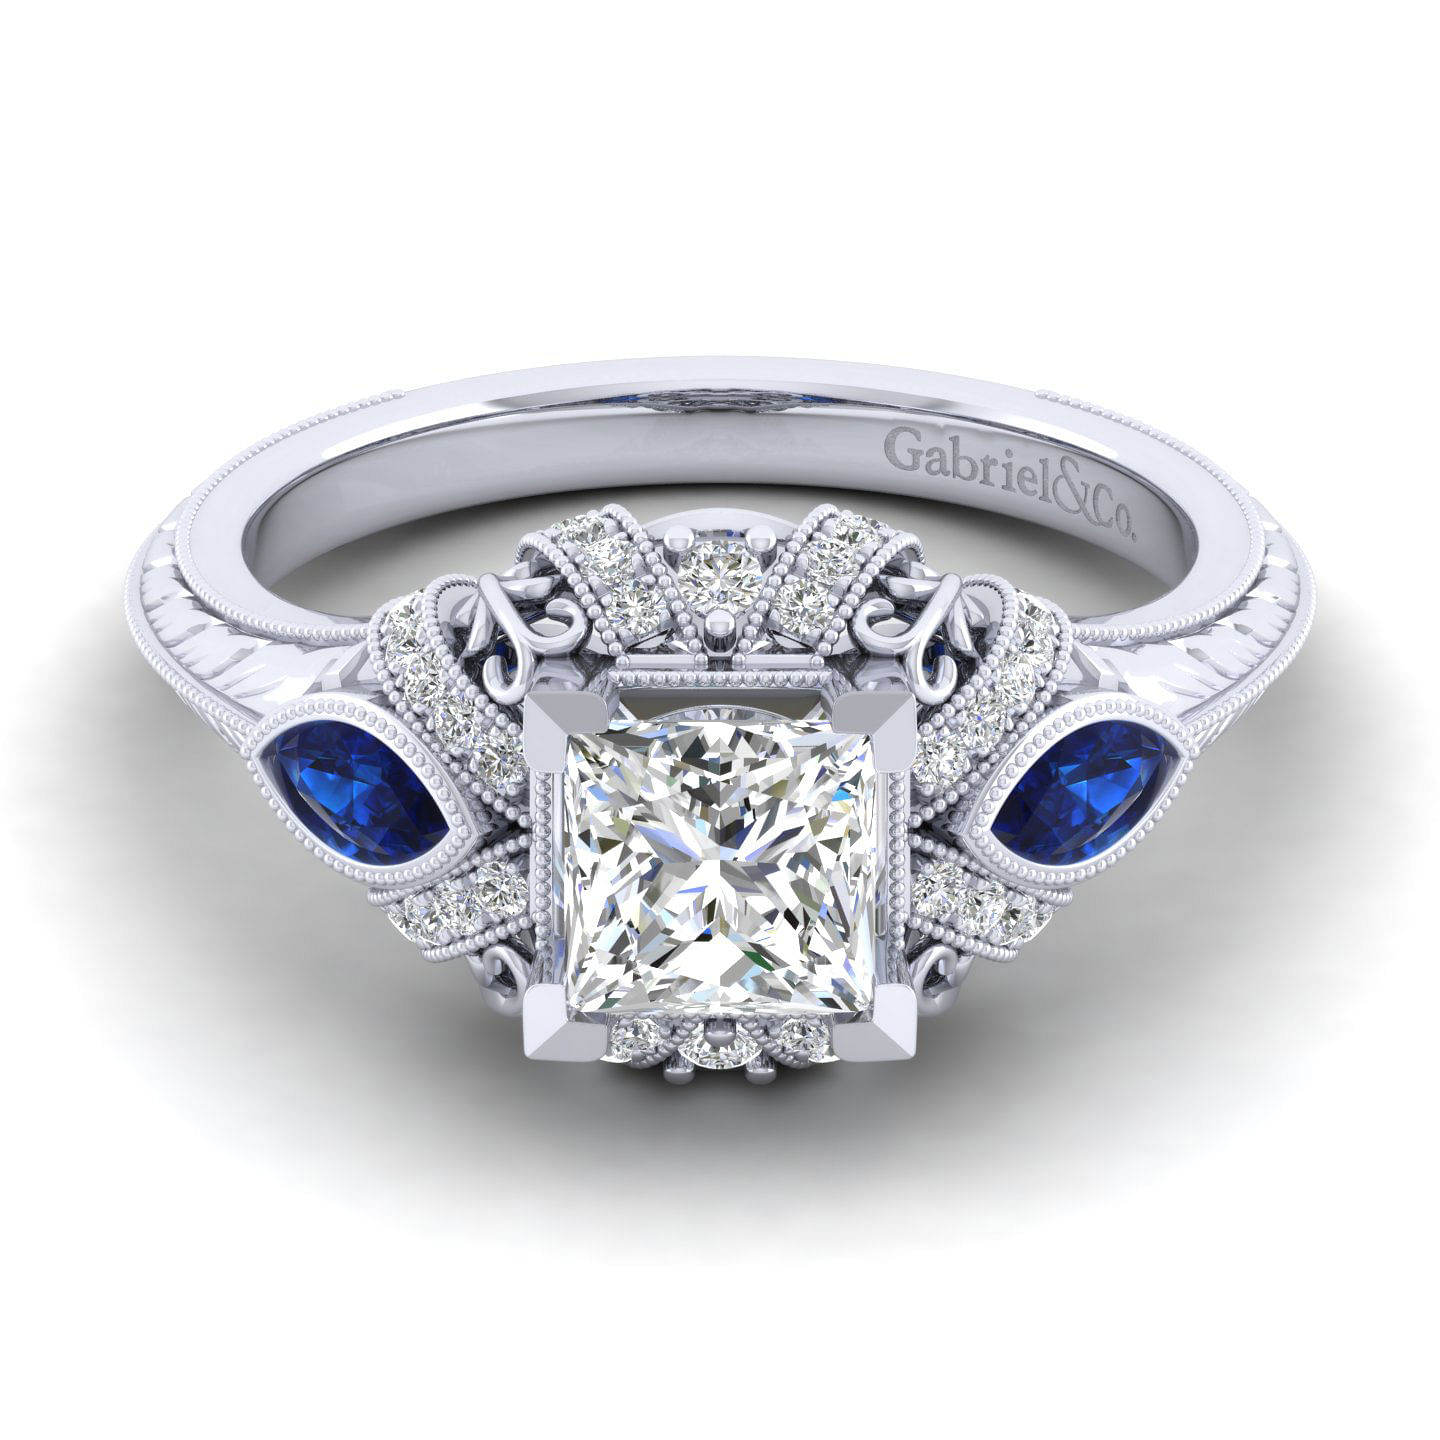 Vintage Inspired 14K White Gold Princess Halo Three Stone Sapphire and Diamond Engagement Ring